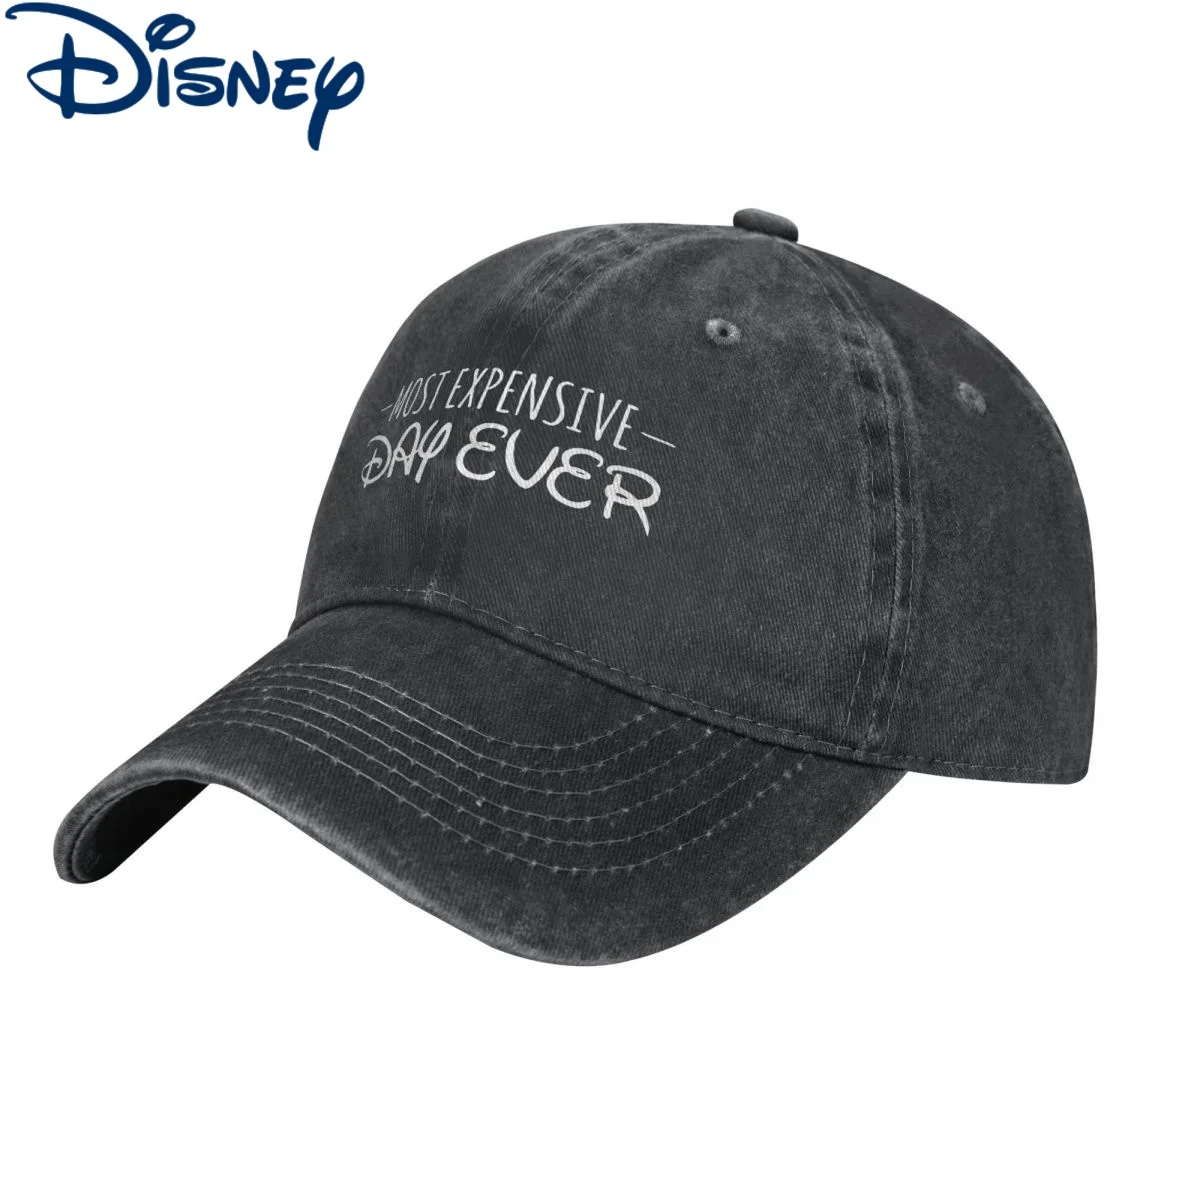 Disney Most Expensive Day Ever Unisex Baseball Caps Cartoon Distressed Washed Hats Cap Fashion Outdoor Workouts Sun Cap